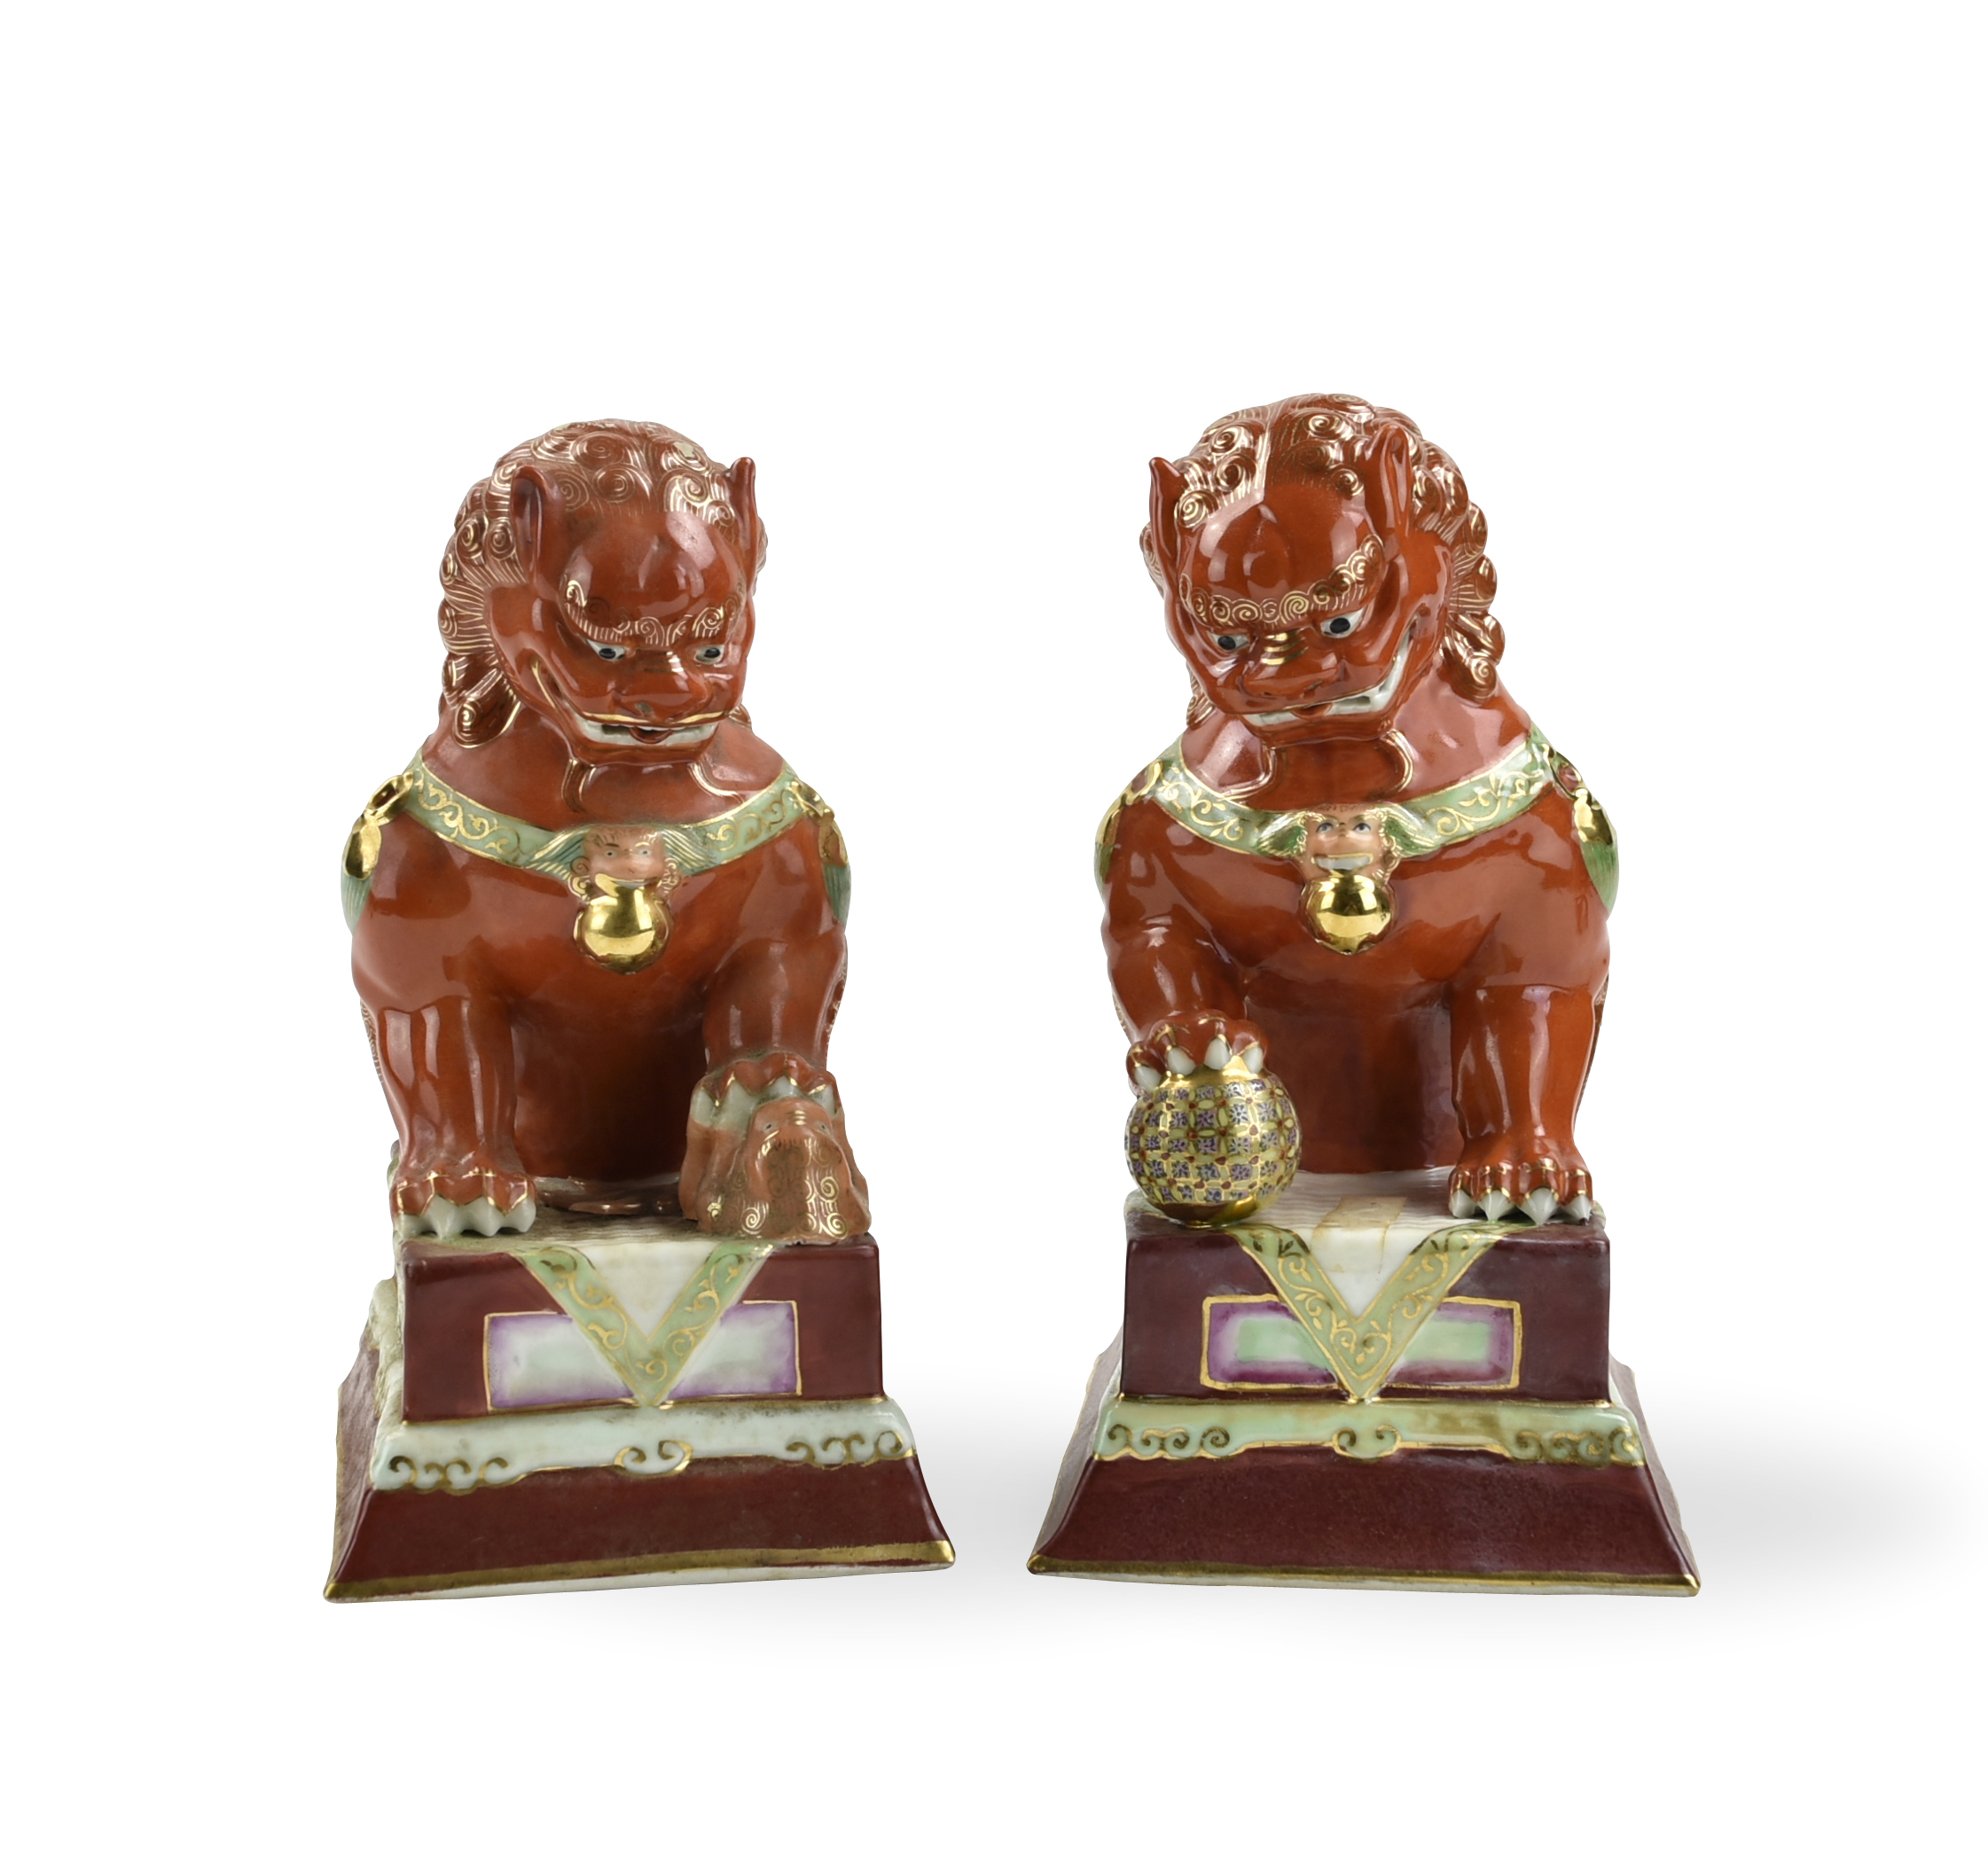 PAIR OF CHINESE PORCELAIN LIONS,20TH